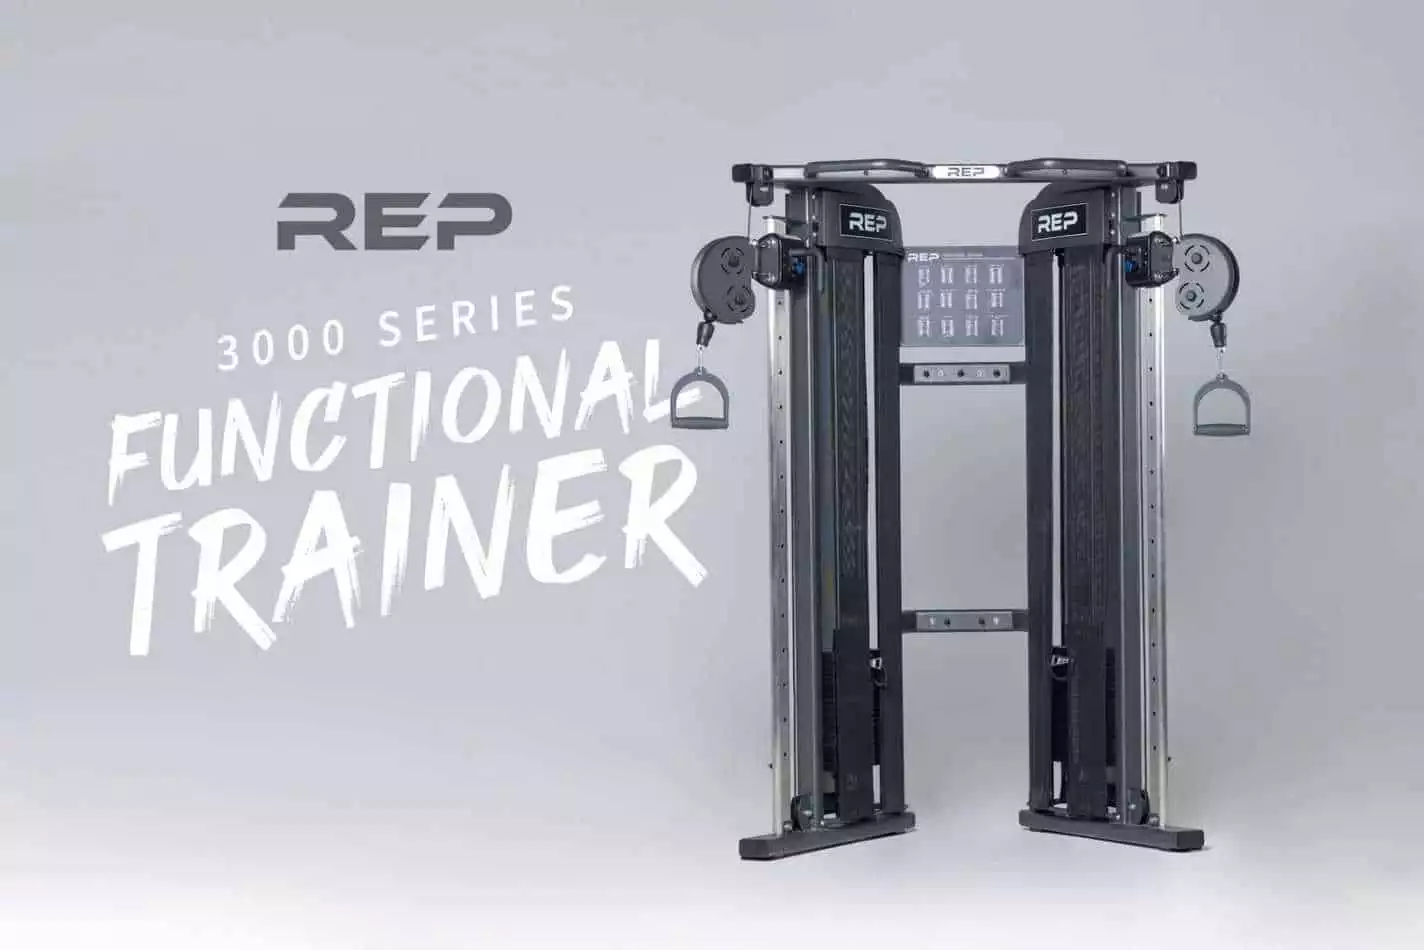 REP FT-3000 COMPACT FUNCTIONAL TRAINER